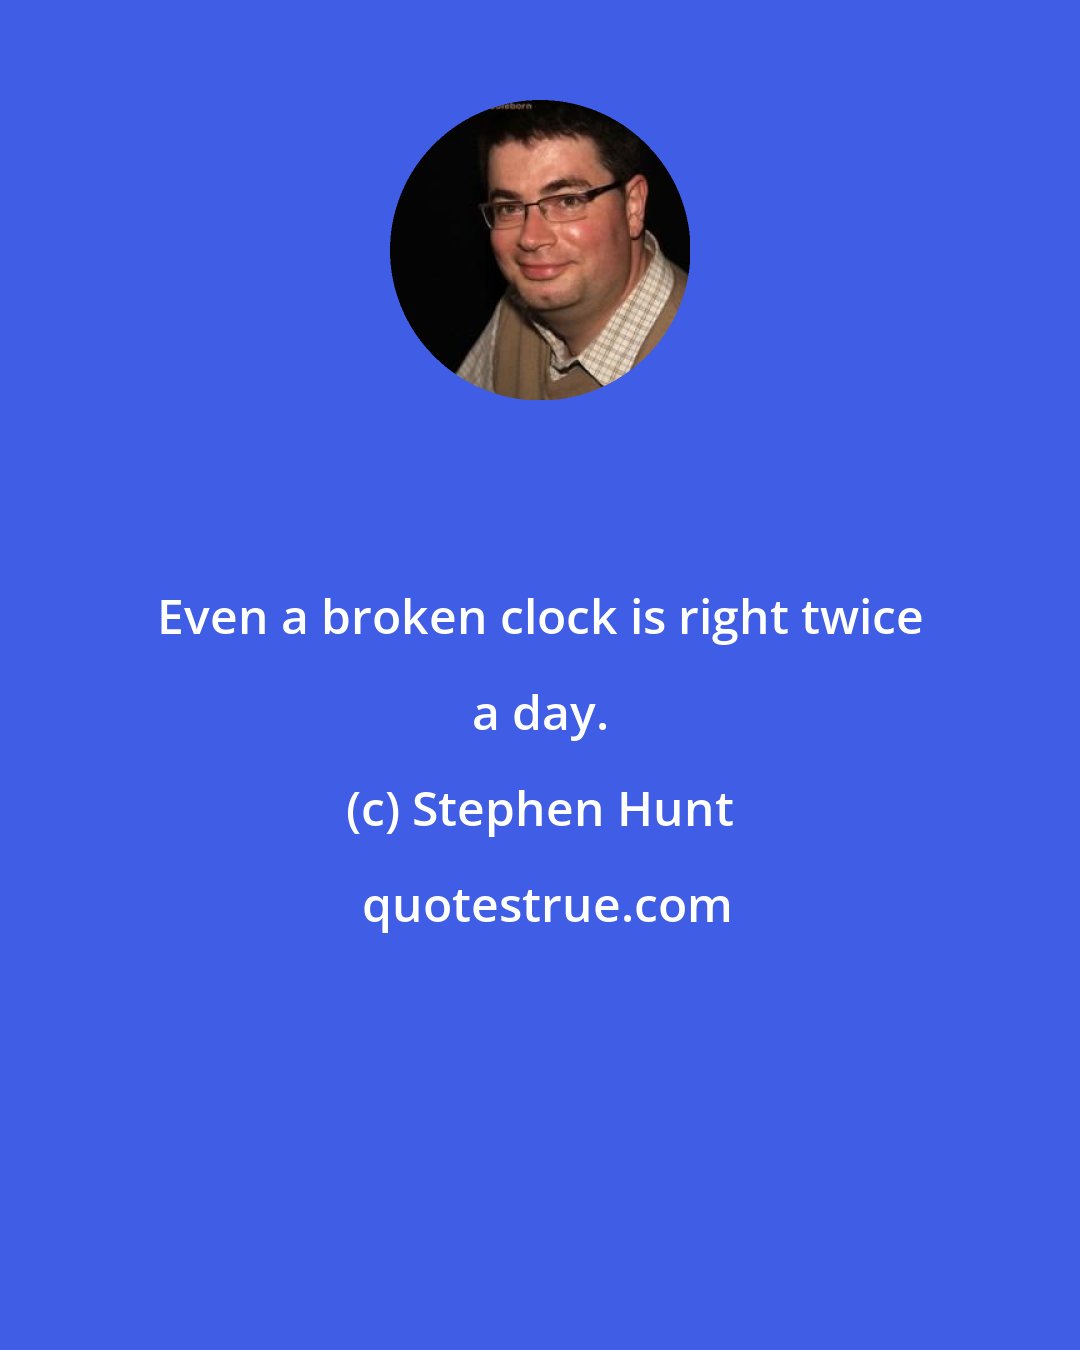 Stephen Hunt: Even a broken clock is right twice a day.